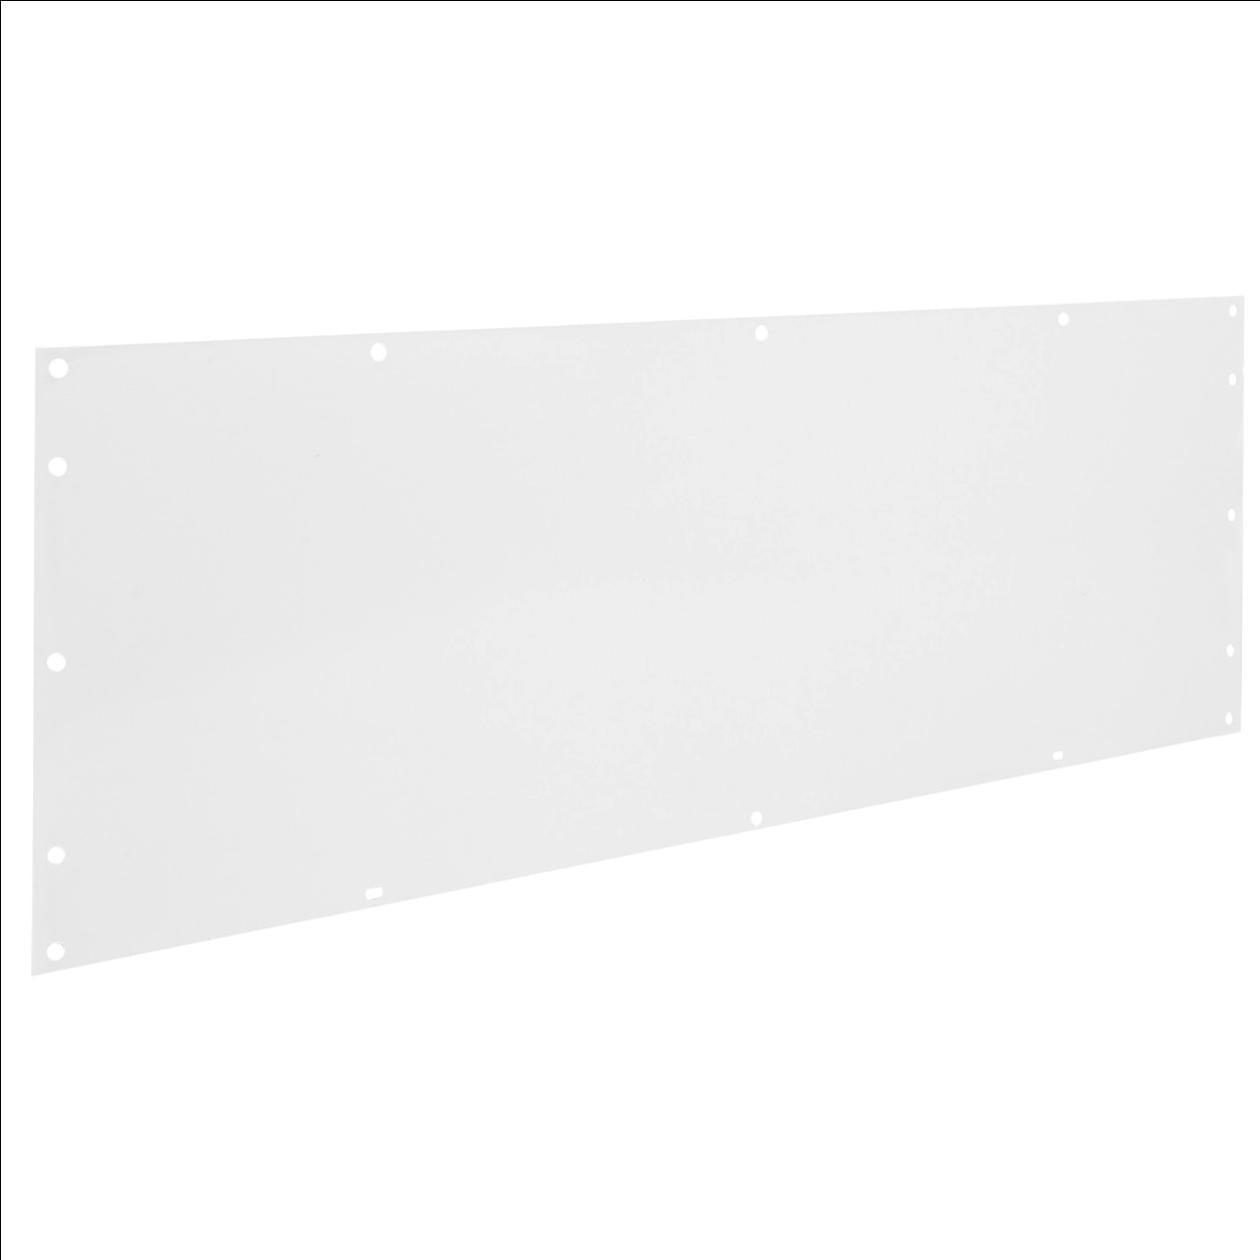 Product Weather Guard Accessory Back Panel for 28 in shelf unit 7-3/4 in tall 9602-3-02 | U.S. Upfitters image